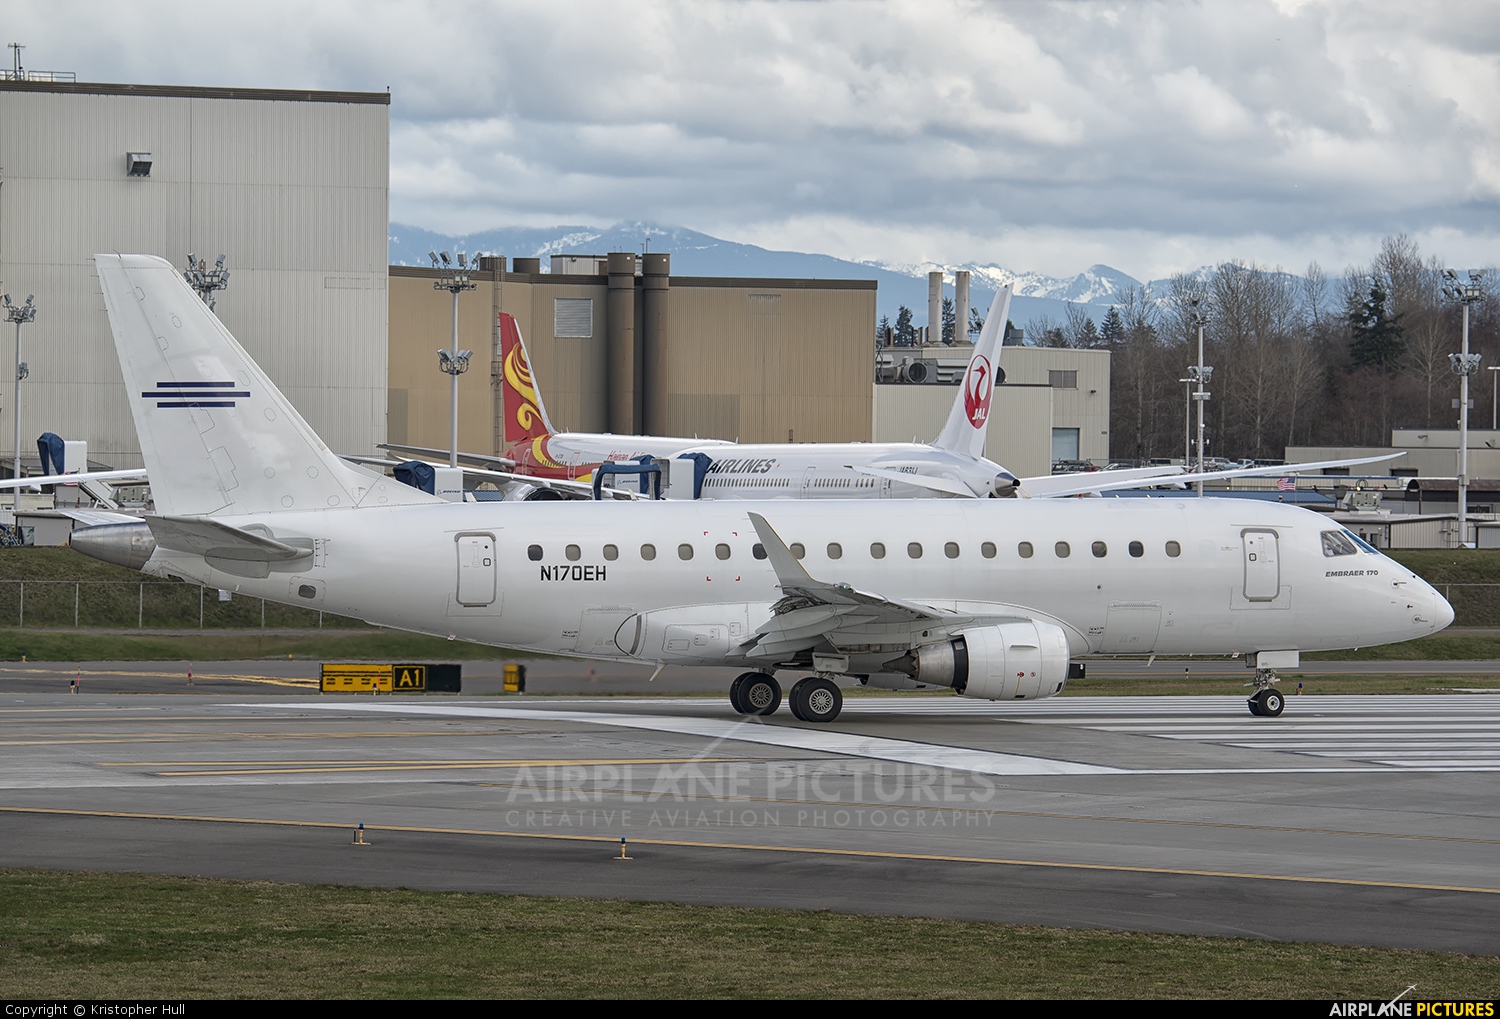 Honeywell Aviation Services N170EH aircraft at Everett - Snohomish County / Paine Field